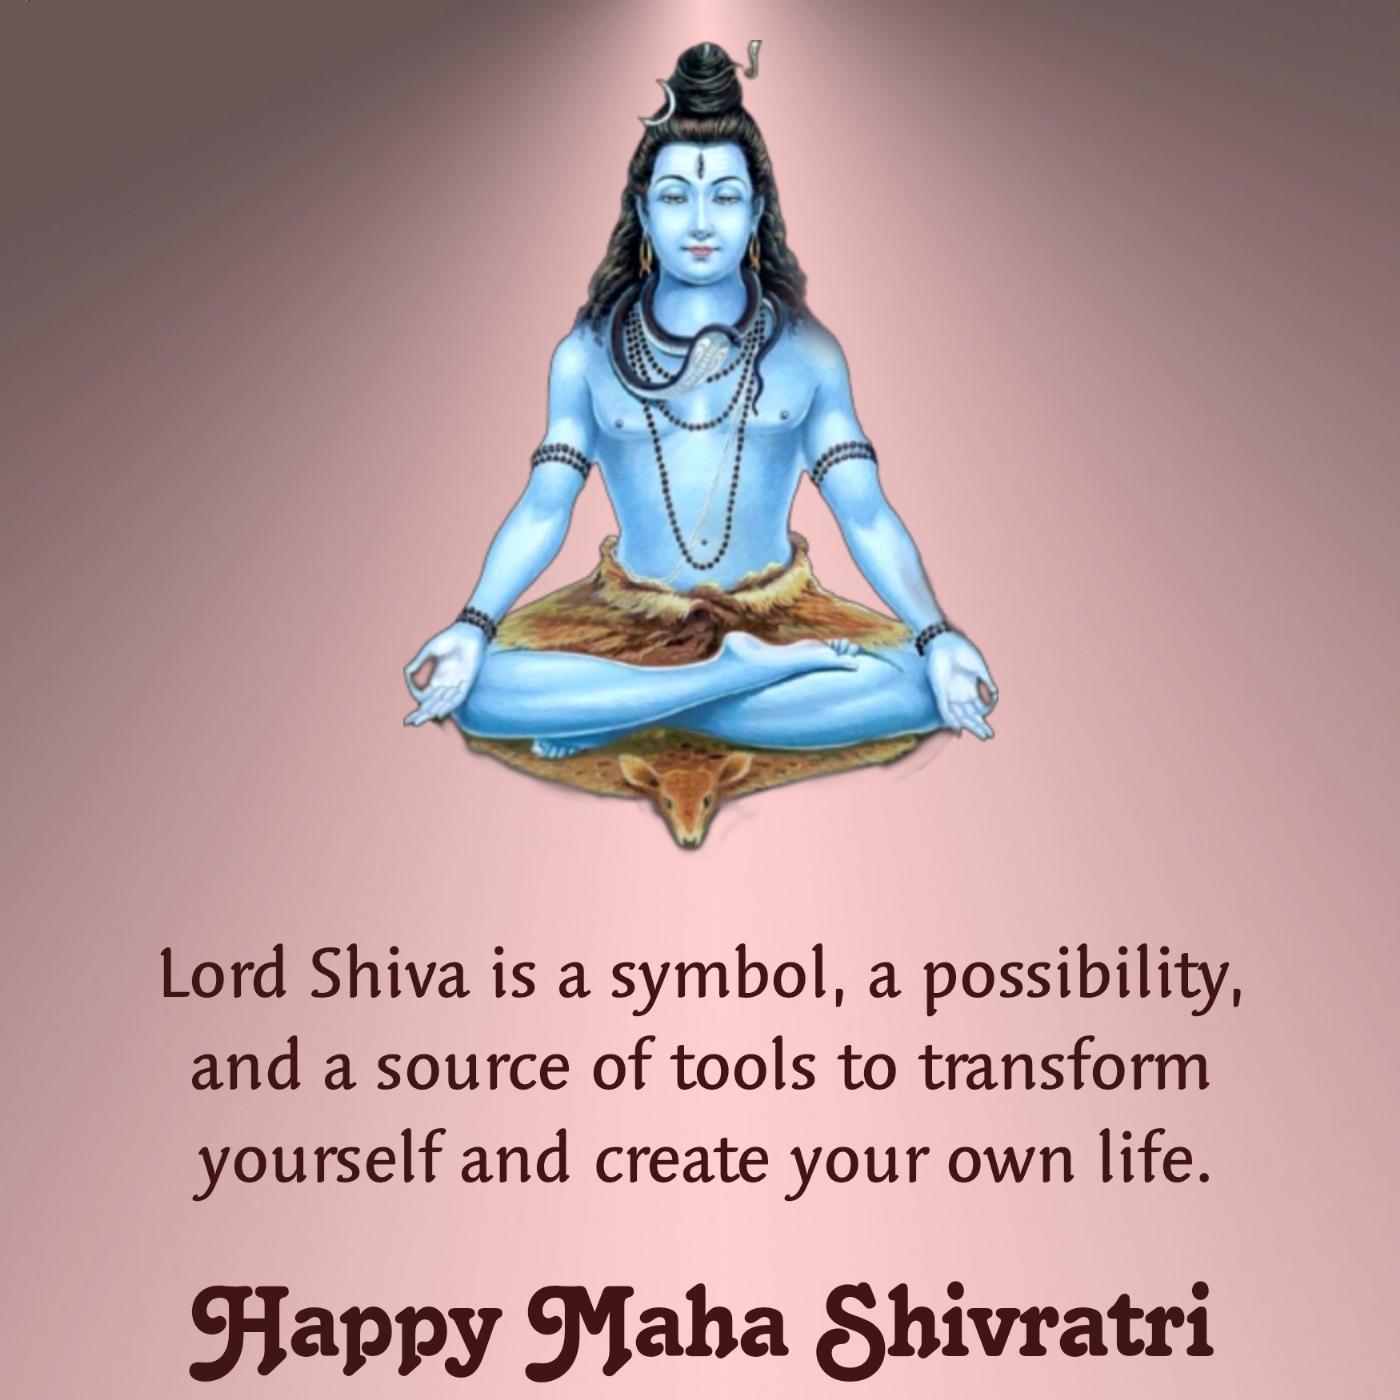 Lord Shiva is a symbol a possibility and a source of tools